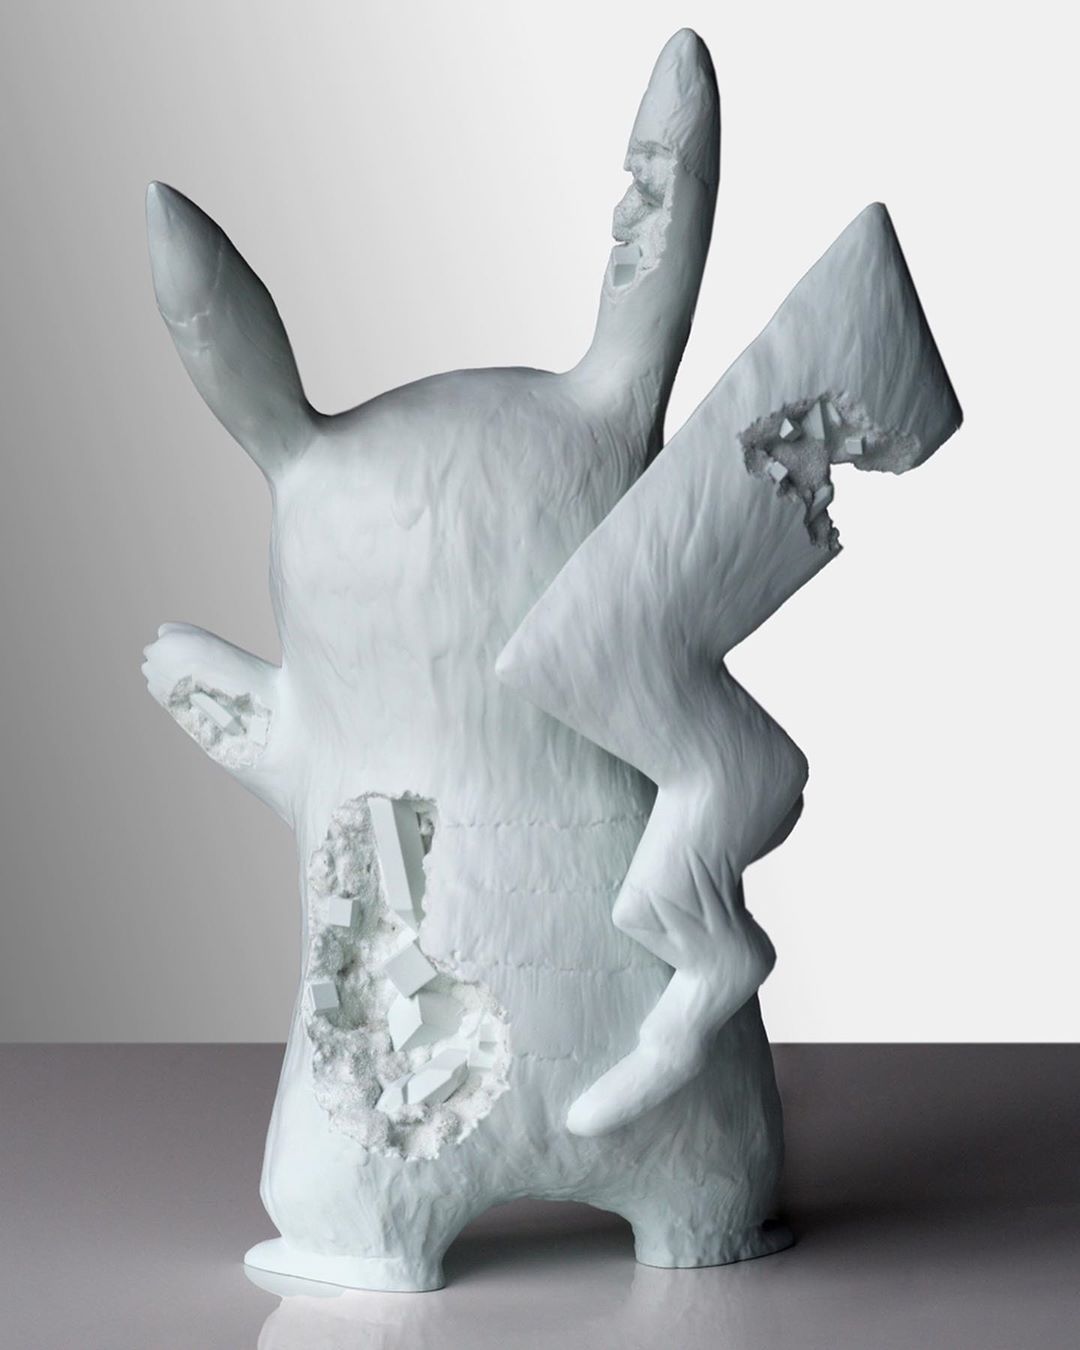 Releases: Daniel Arsham – “PIKACHU Editions” « Arrested Motion